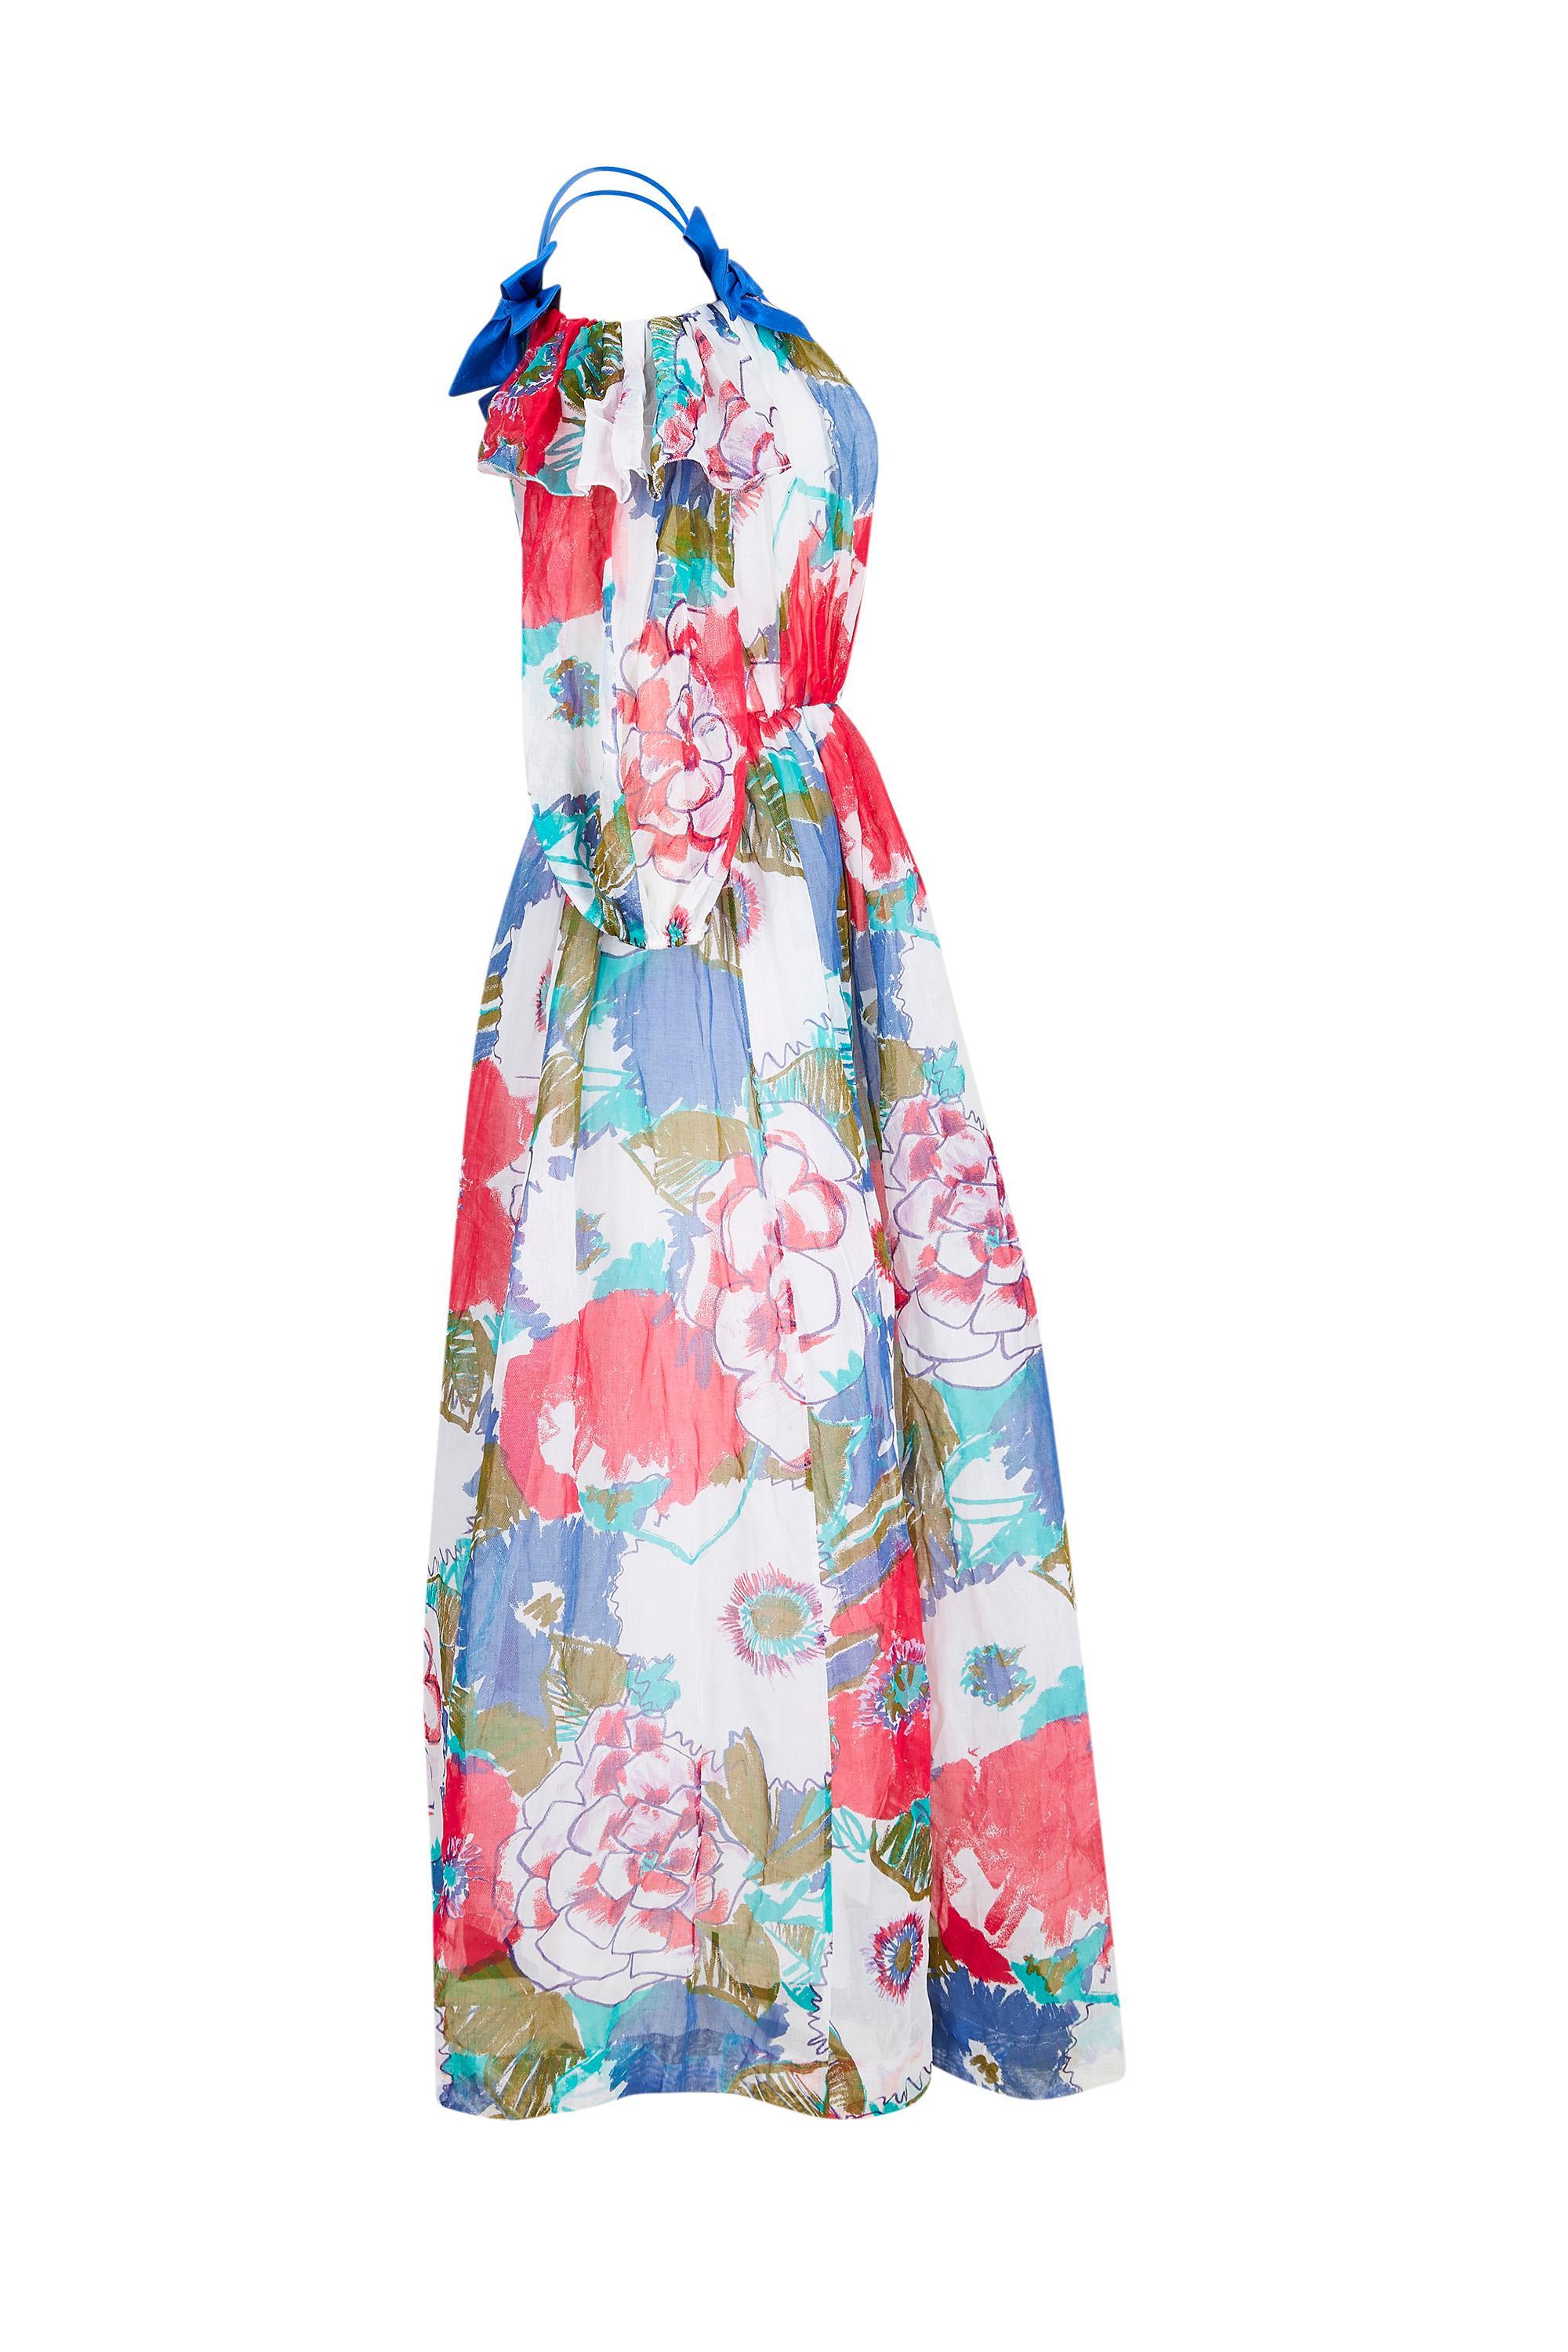 1980s printed cotton organdy dress is by British designer Donald Campbell who created beautiful, individually cut ready to wear pieces from quality couture fabrics from the early 70's to late 00's. The bold floral print depicts poppies and roses in